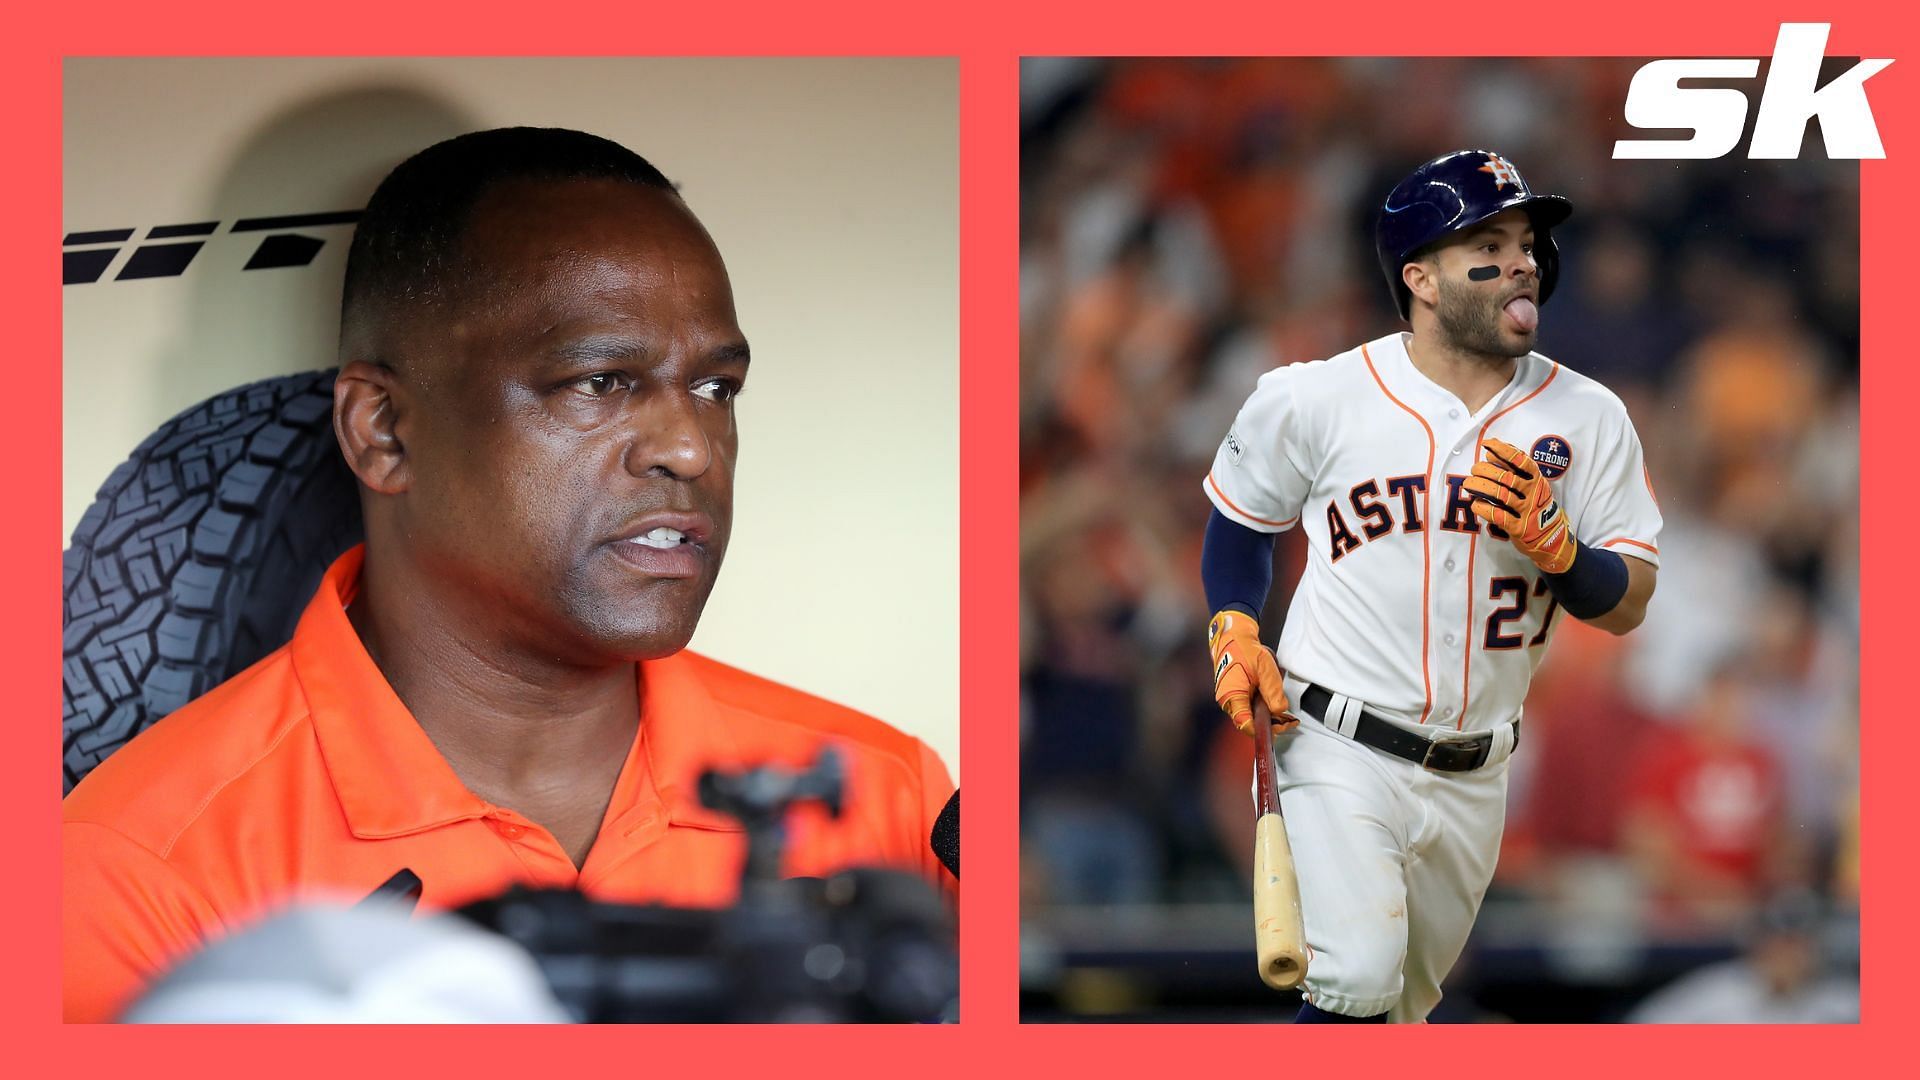 GM Dana Brown and Jose Altuve of the Houston Astros